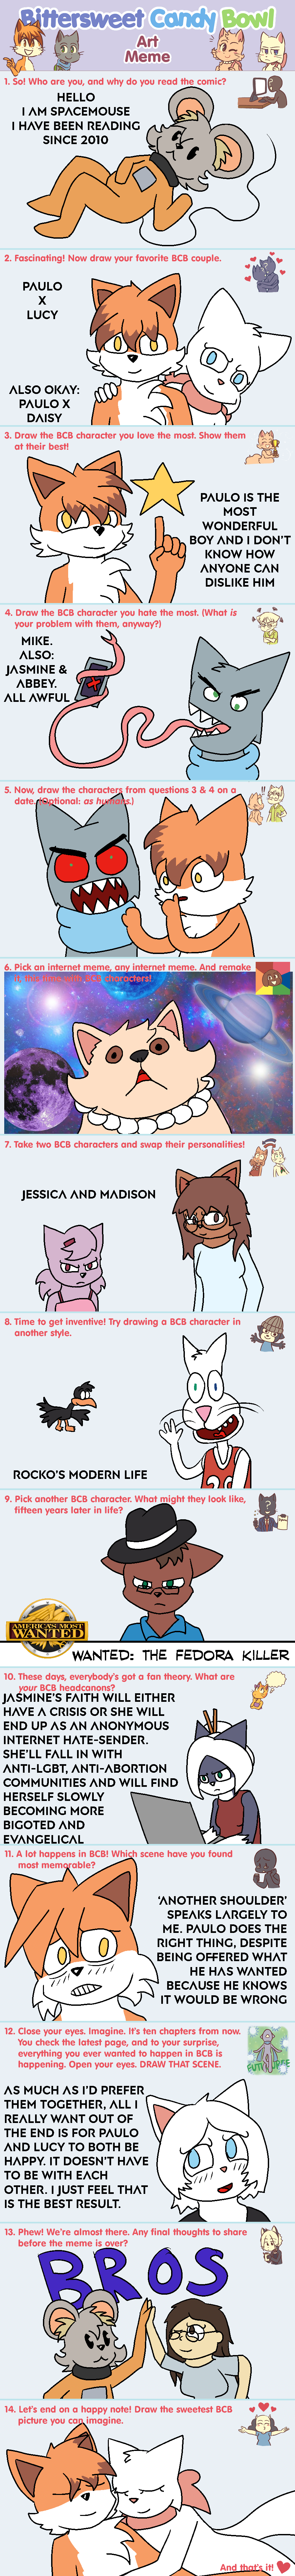 Candybooru image #13501, tagged with Abbey Adult_Lucy BCB_Art_Meme Daisy Error Jasmine Jessica Jordan Lucy Madison Mike MikexPaulo Paulo PauloxLucy SpaceMouse SpaceMouse_(Artist) Taeshi